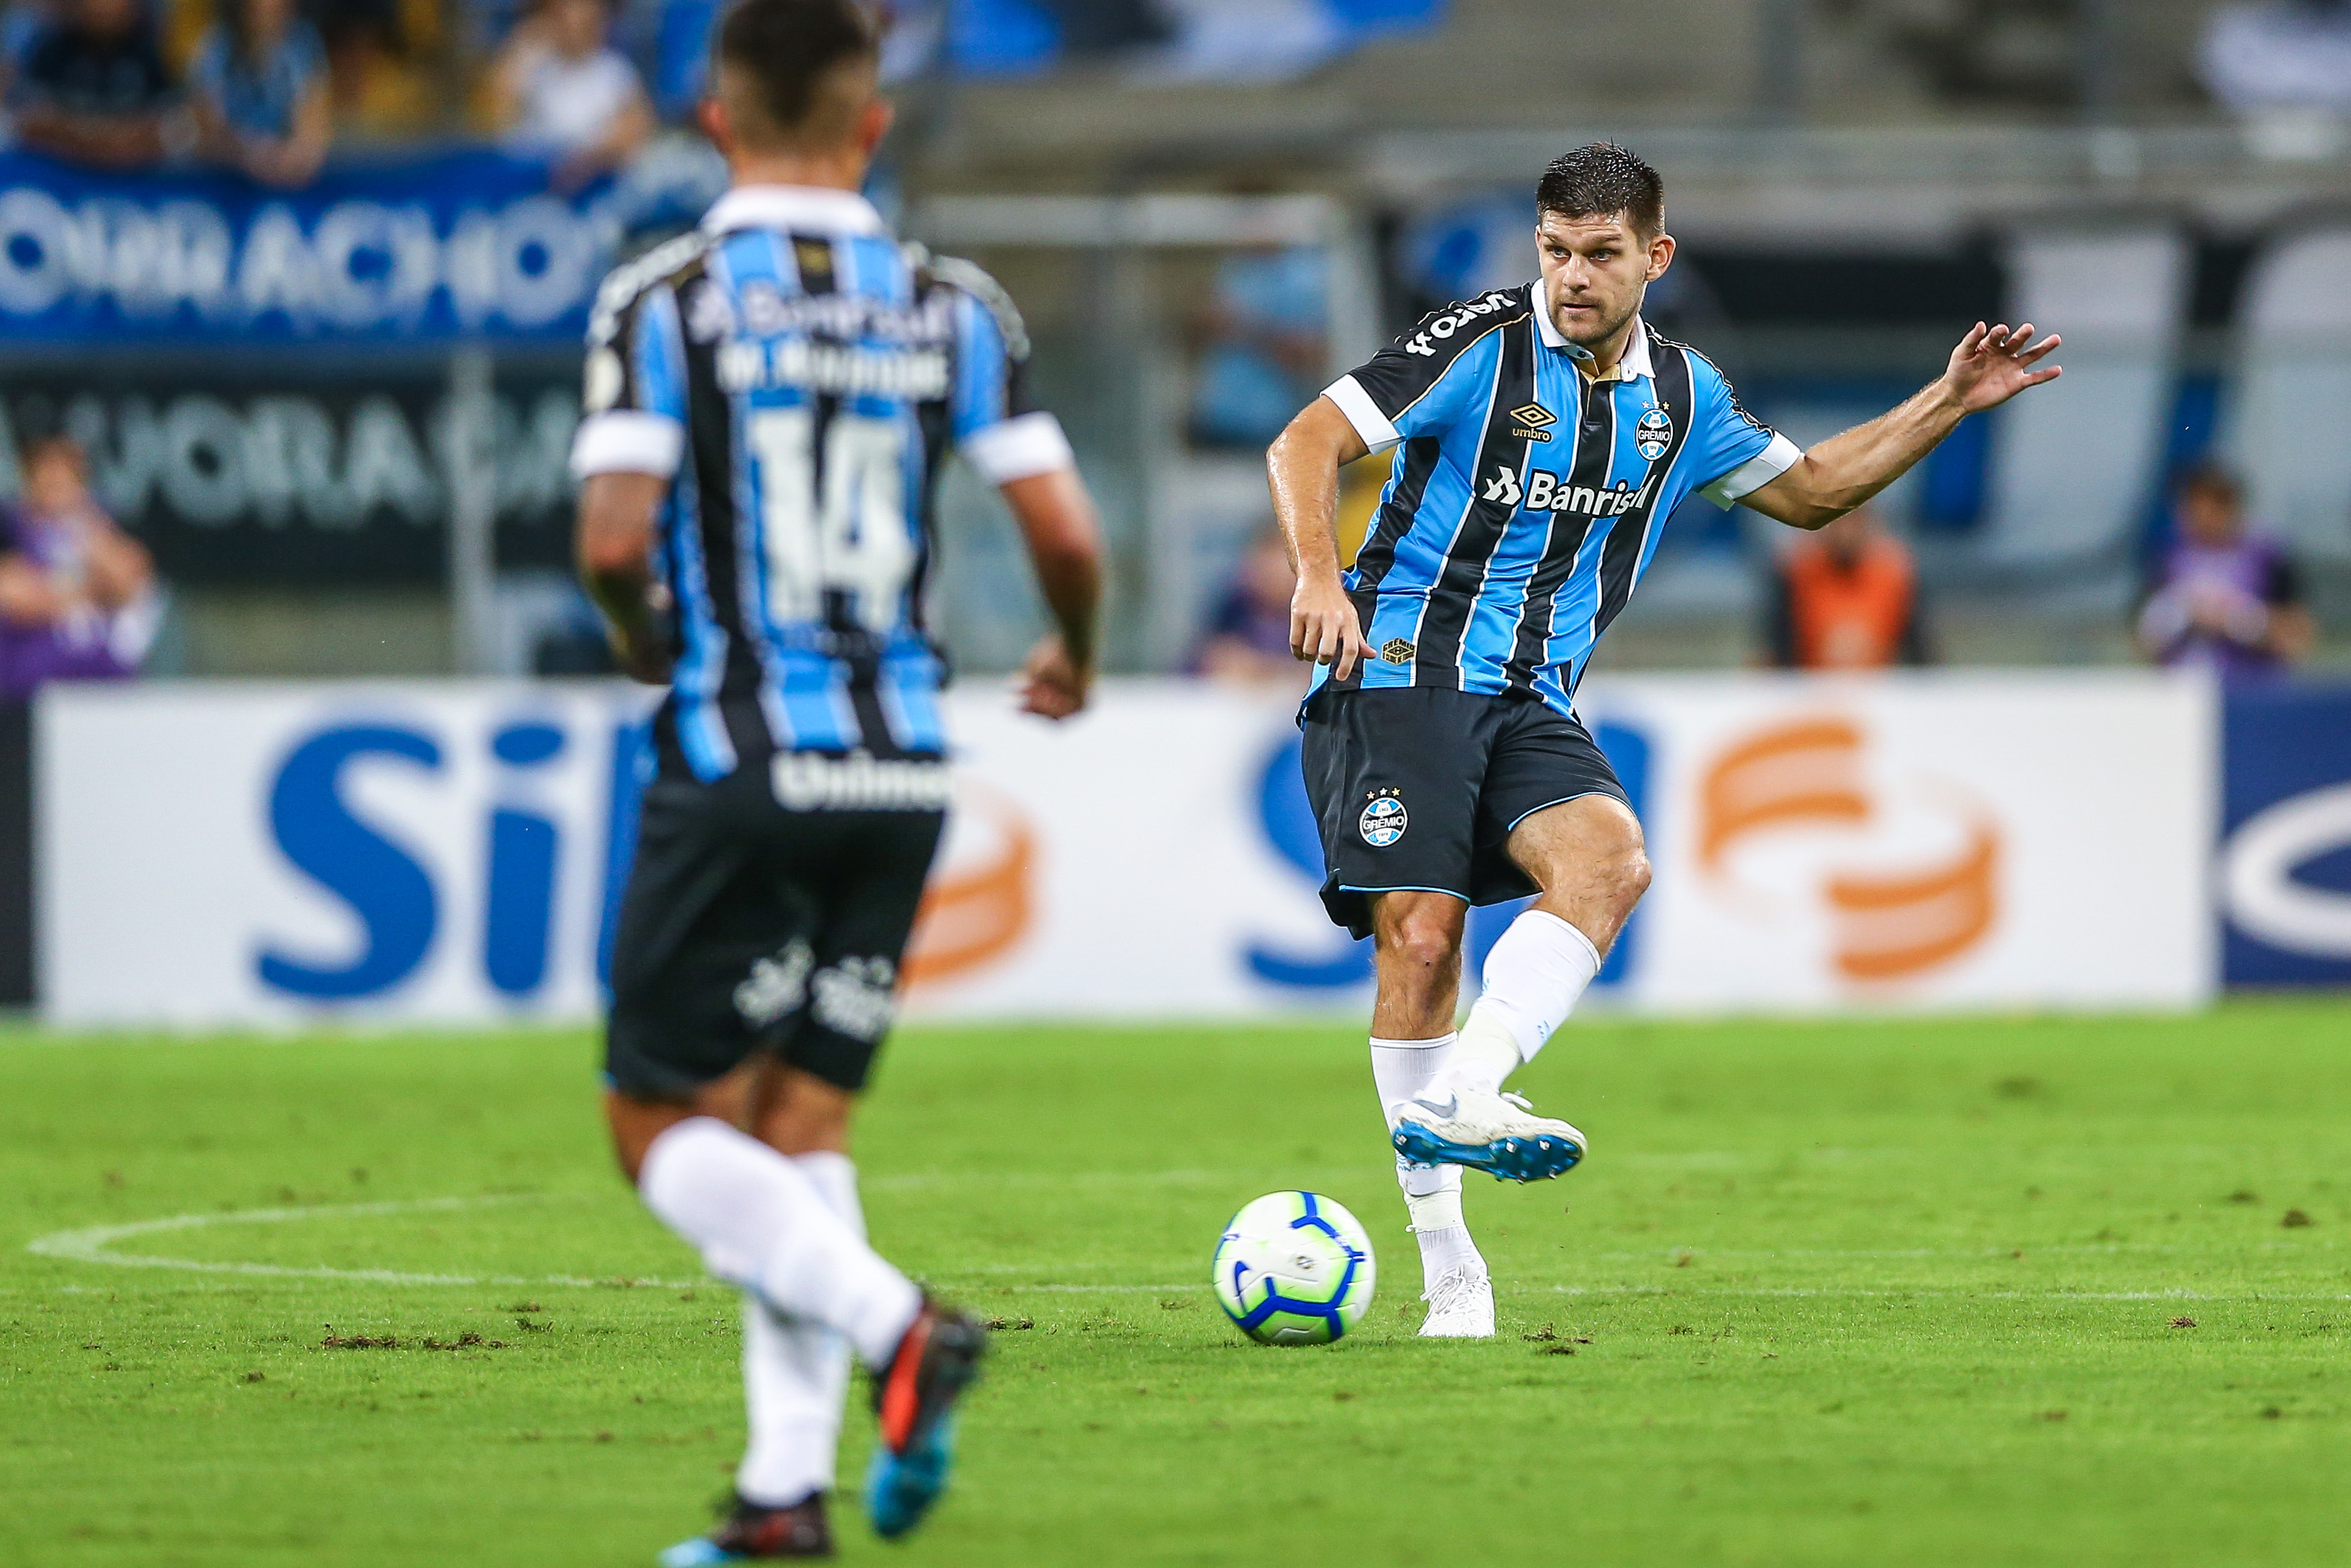 PORTO ALEGRE, BRAZIL - MAY 5: Walter Kannemann of Gremio during the match between Gremio and Fluminense, as part of  Brasileirao Series A 2019, at Arena do Gremio on May 5, 2019, in Porto Alegre, Brazil. (Photo by Lucas Uebel/Getty Images)